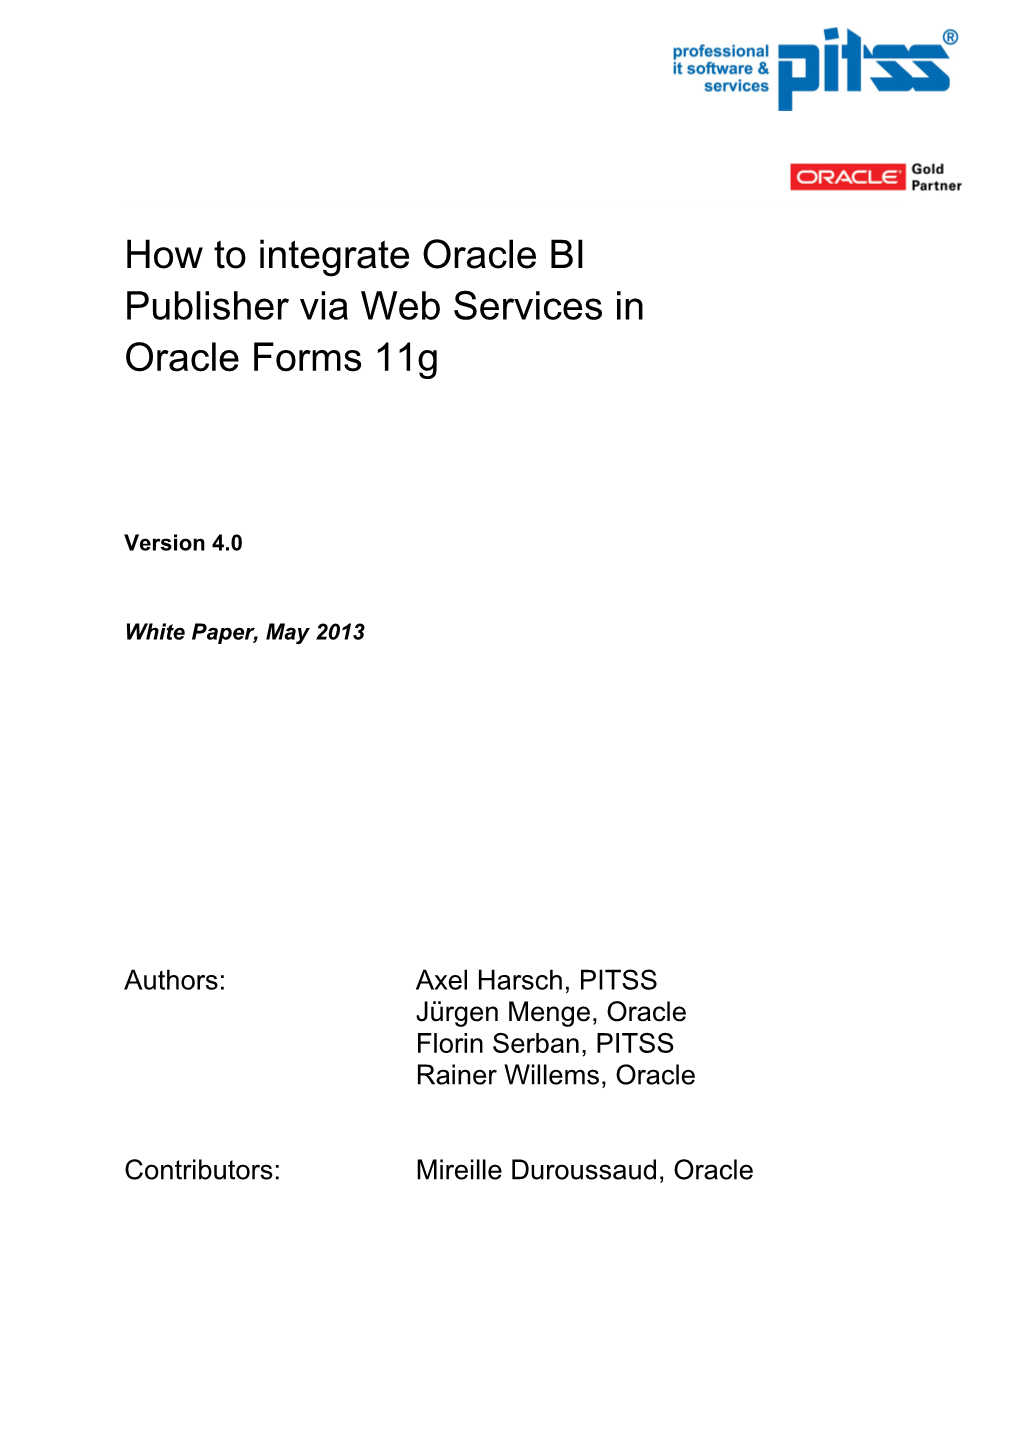 How to Integrate Oracle BI Publisher Via Web Services in Oracle Forms 11G